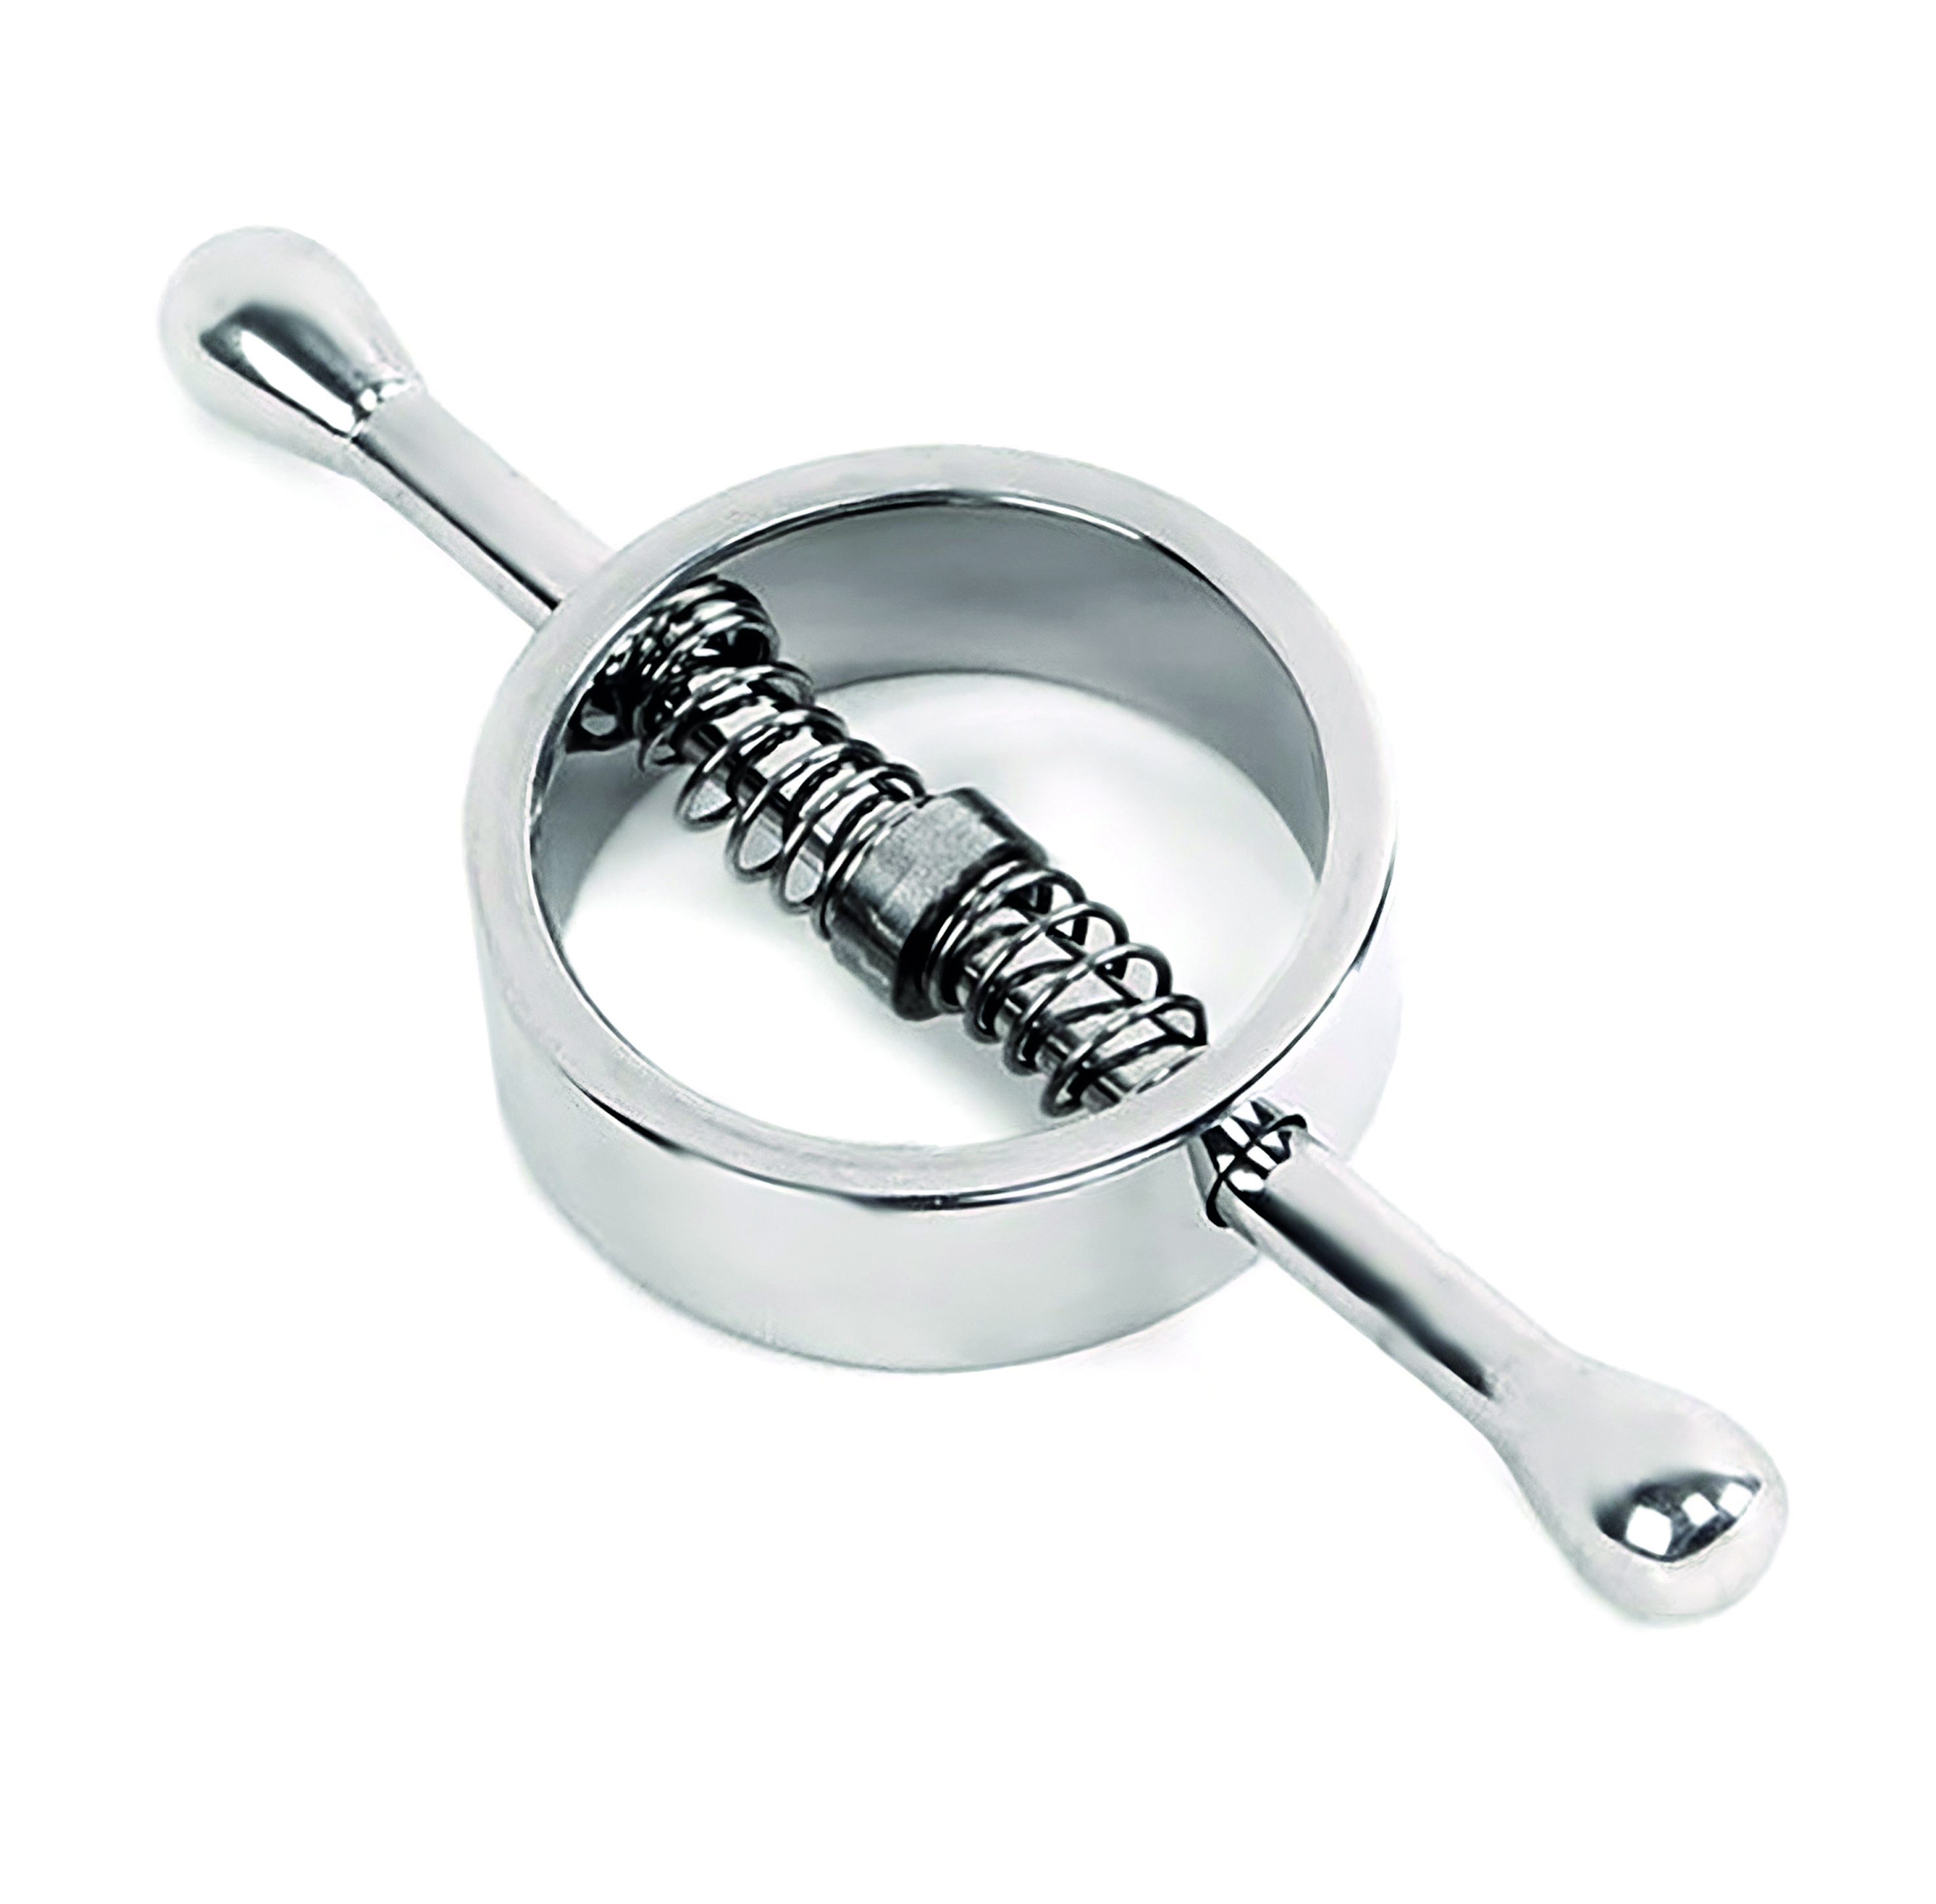 XX-DREAMSTOYS Spring Loaded Nipple Clamps